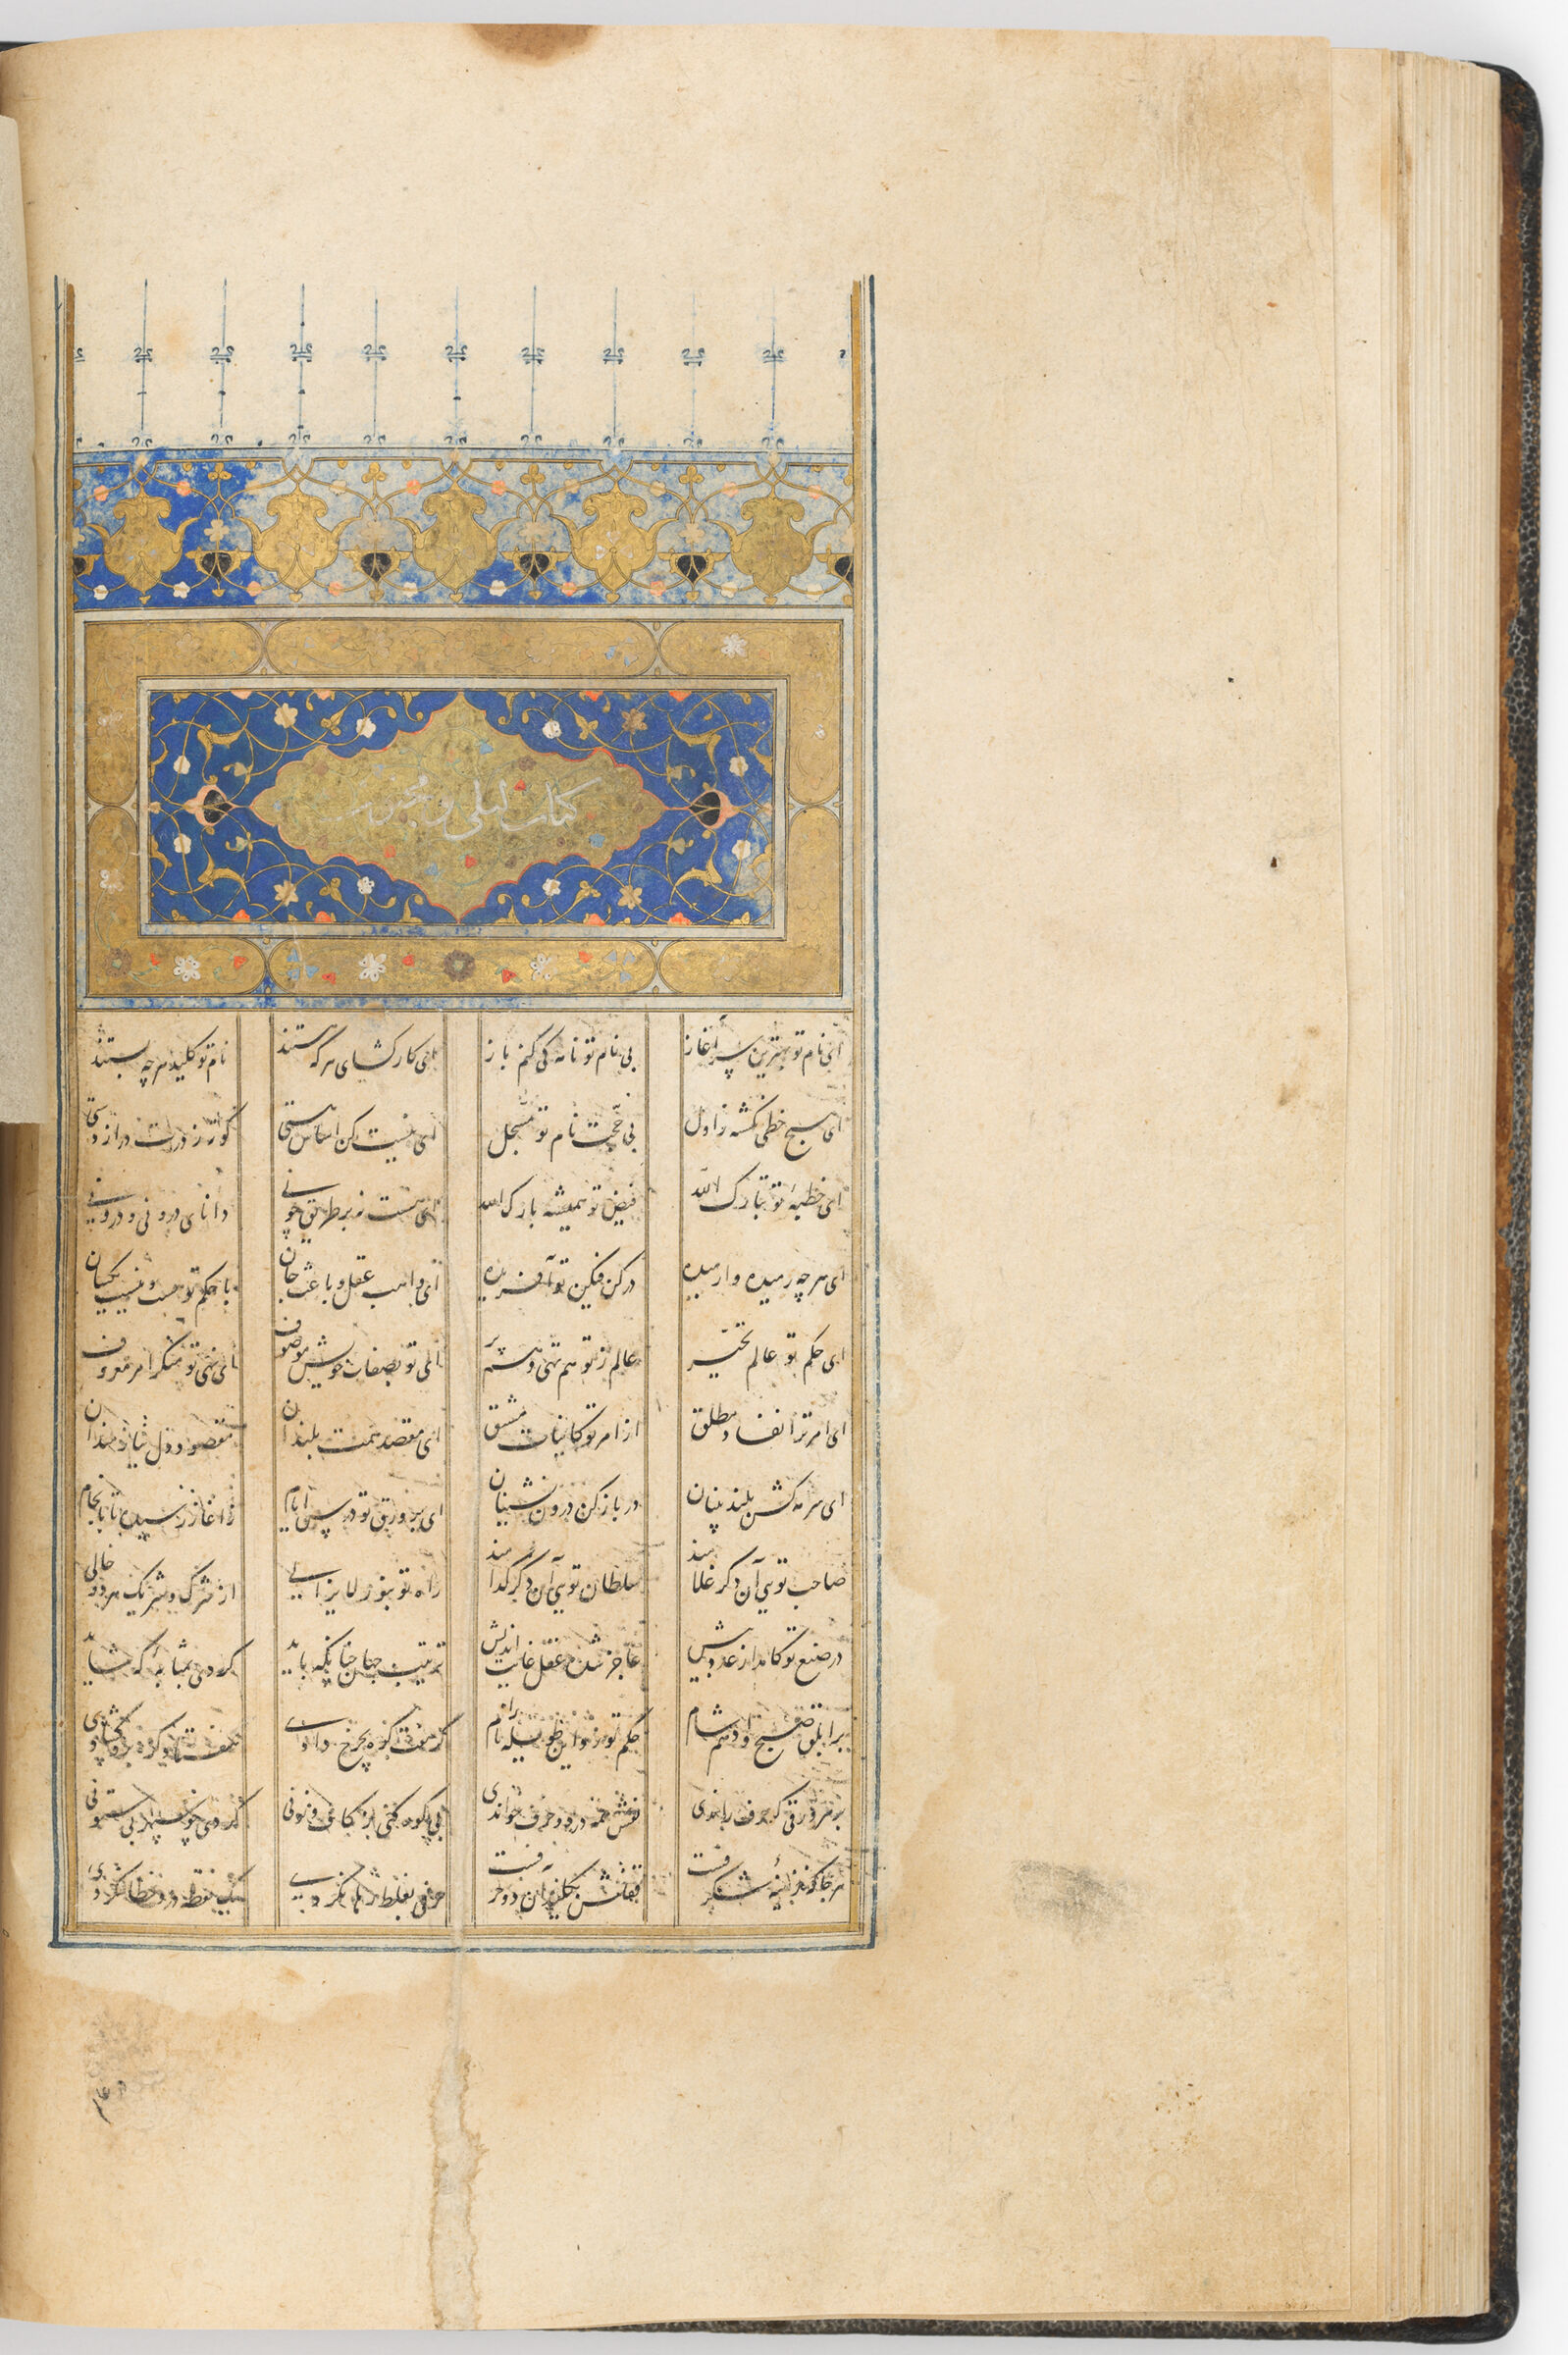 Text Folio Containing The Colophon At The End Of Khusraw And Shirin, Illuminated Sarlawh Of Layla Va Majnun (Text Recto; Sarlawh Verso Of Folio 117), From A Manuscript Of The Khamsa By Nizami